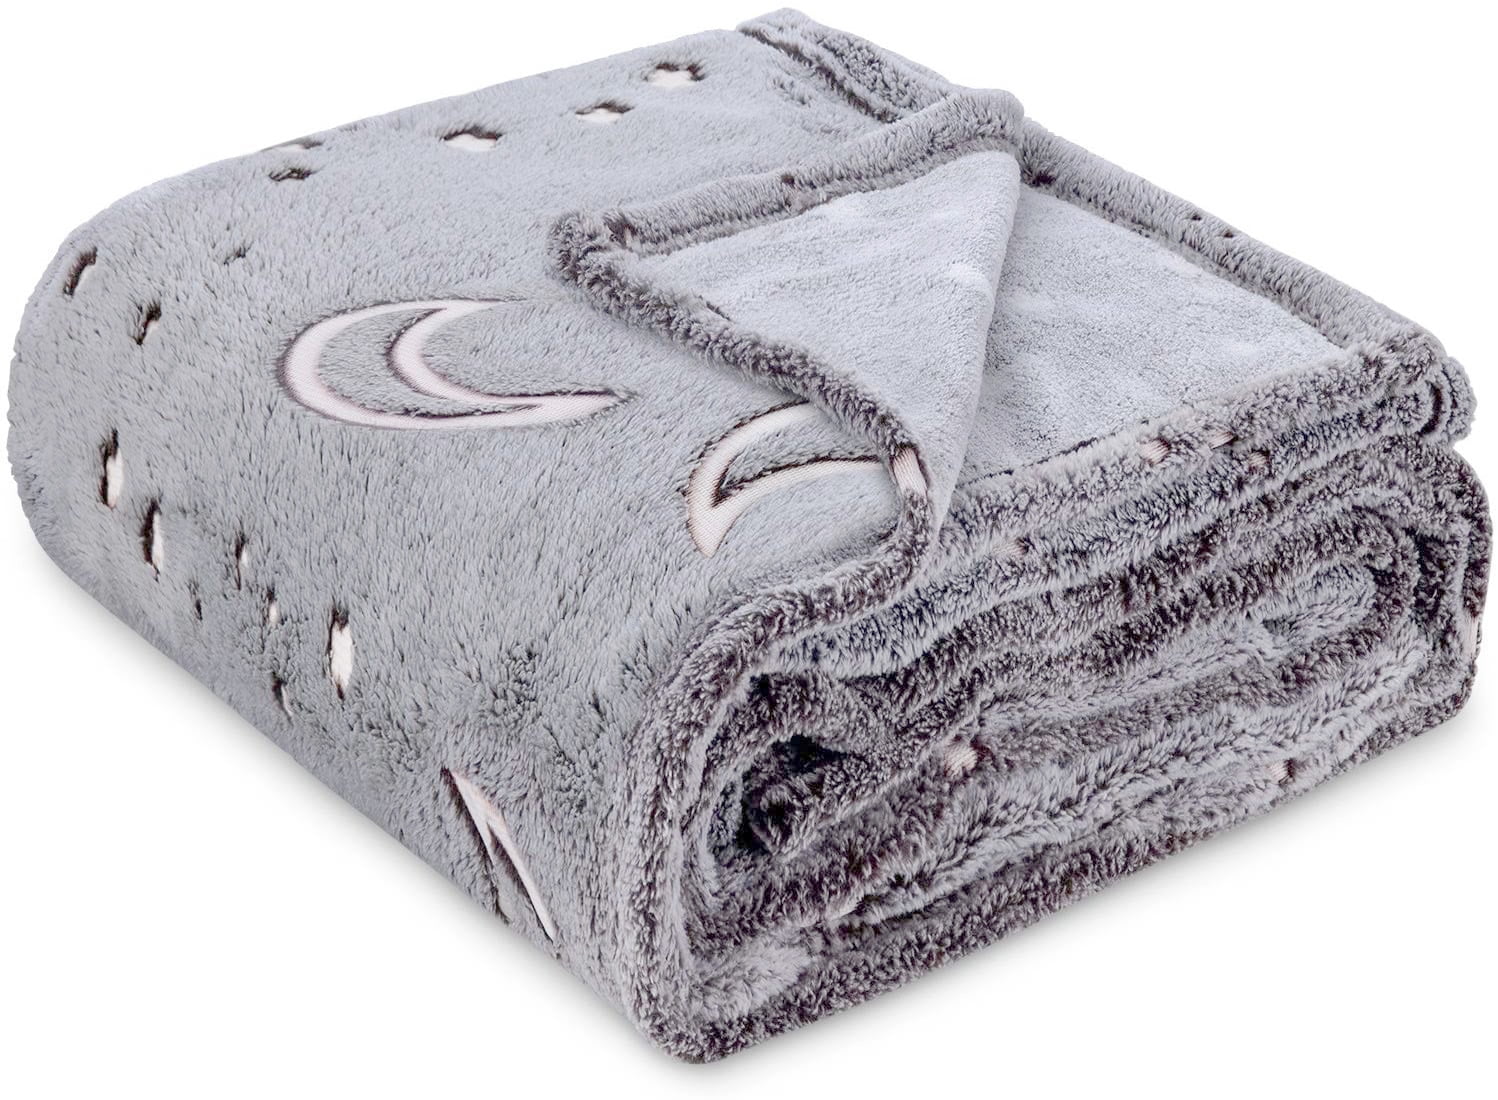 Luxury Sparkle Charcoal Silver Waffle Throws Fleece Blanket Small Medium Large 